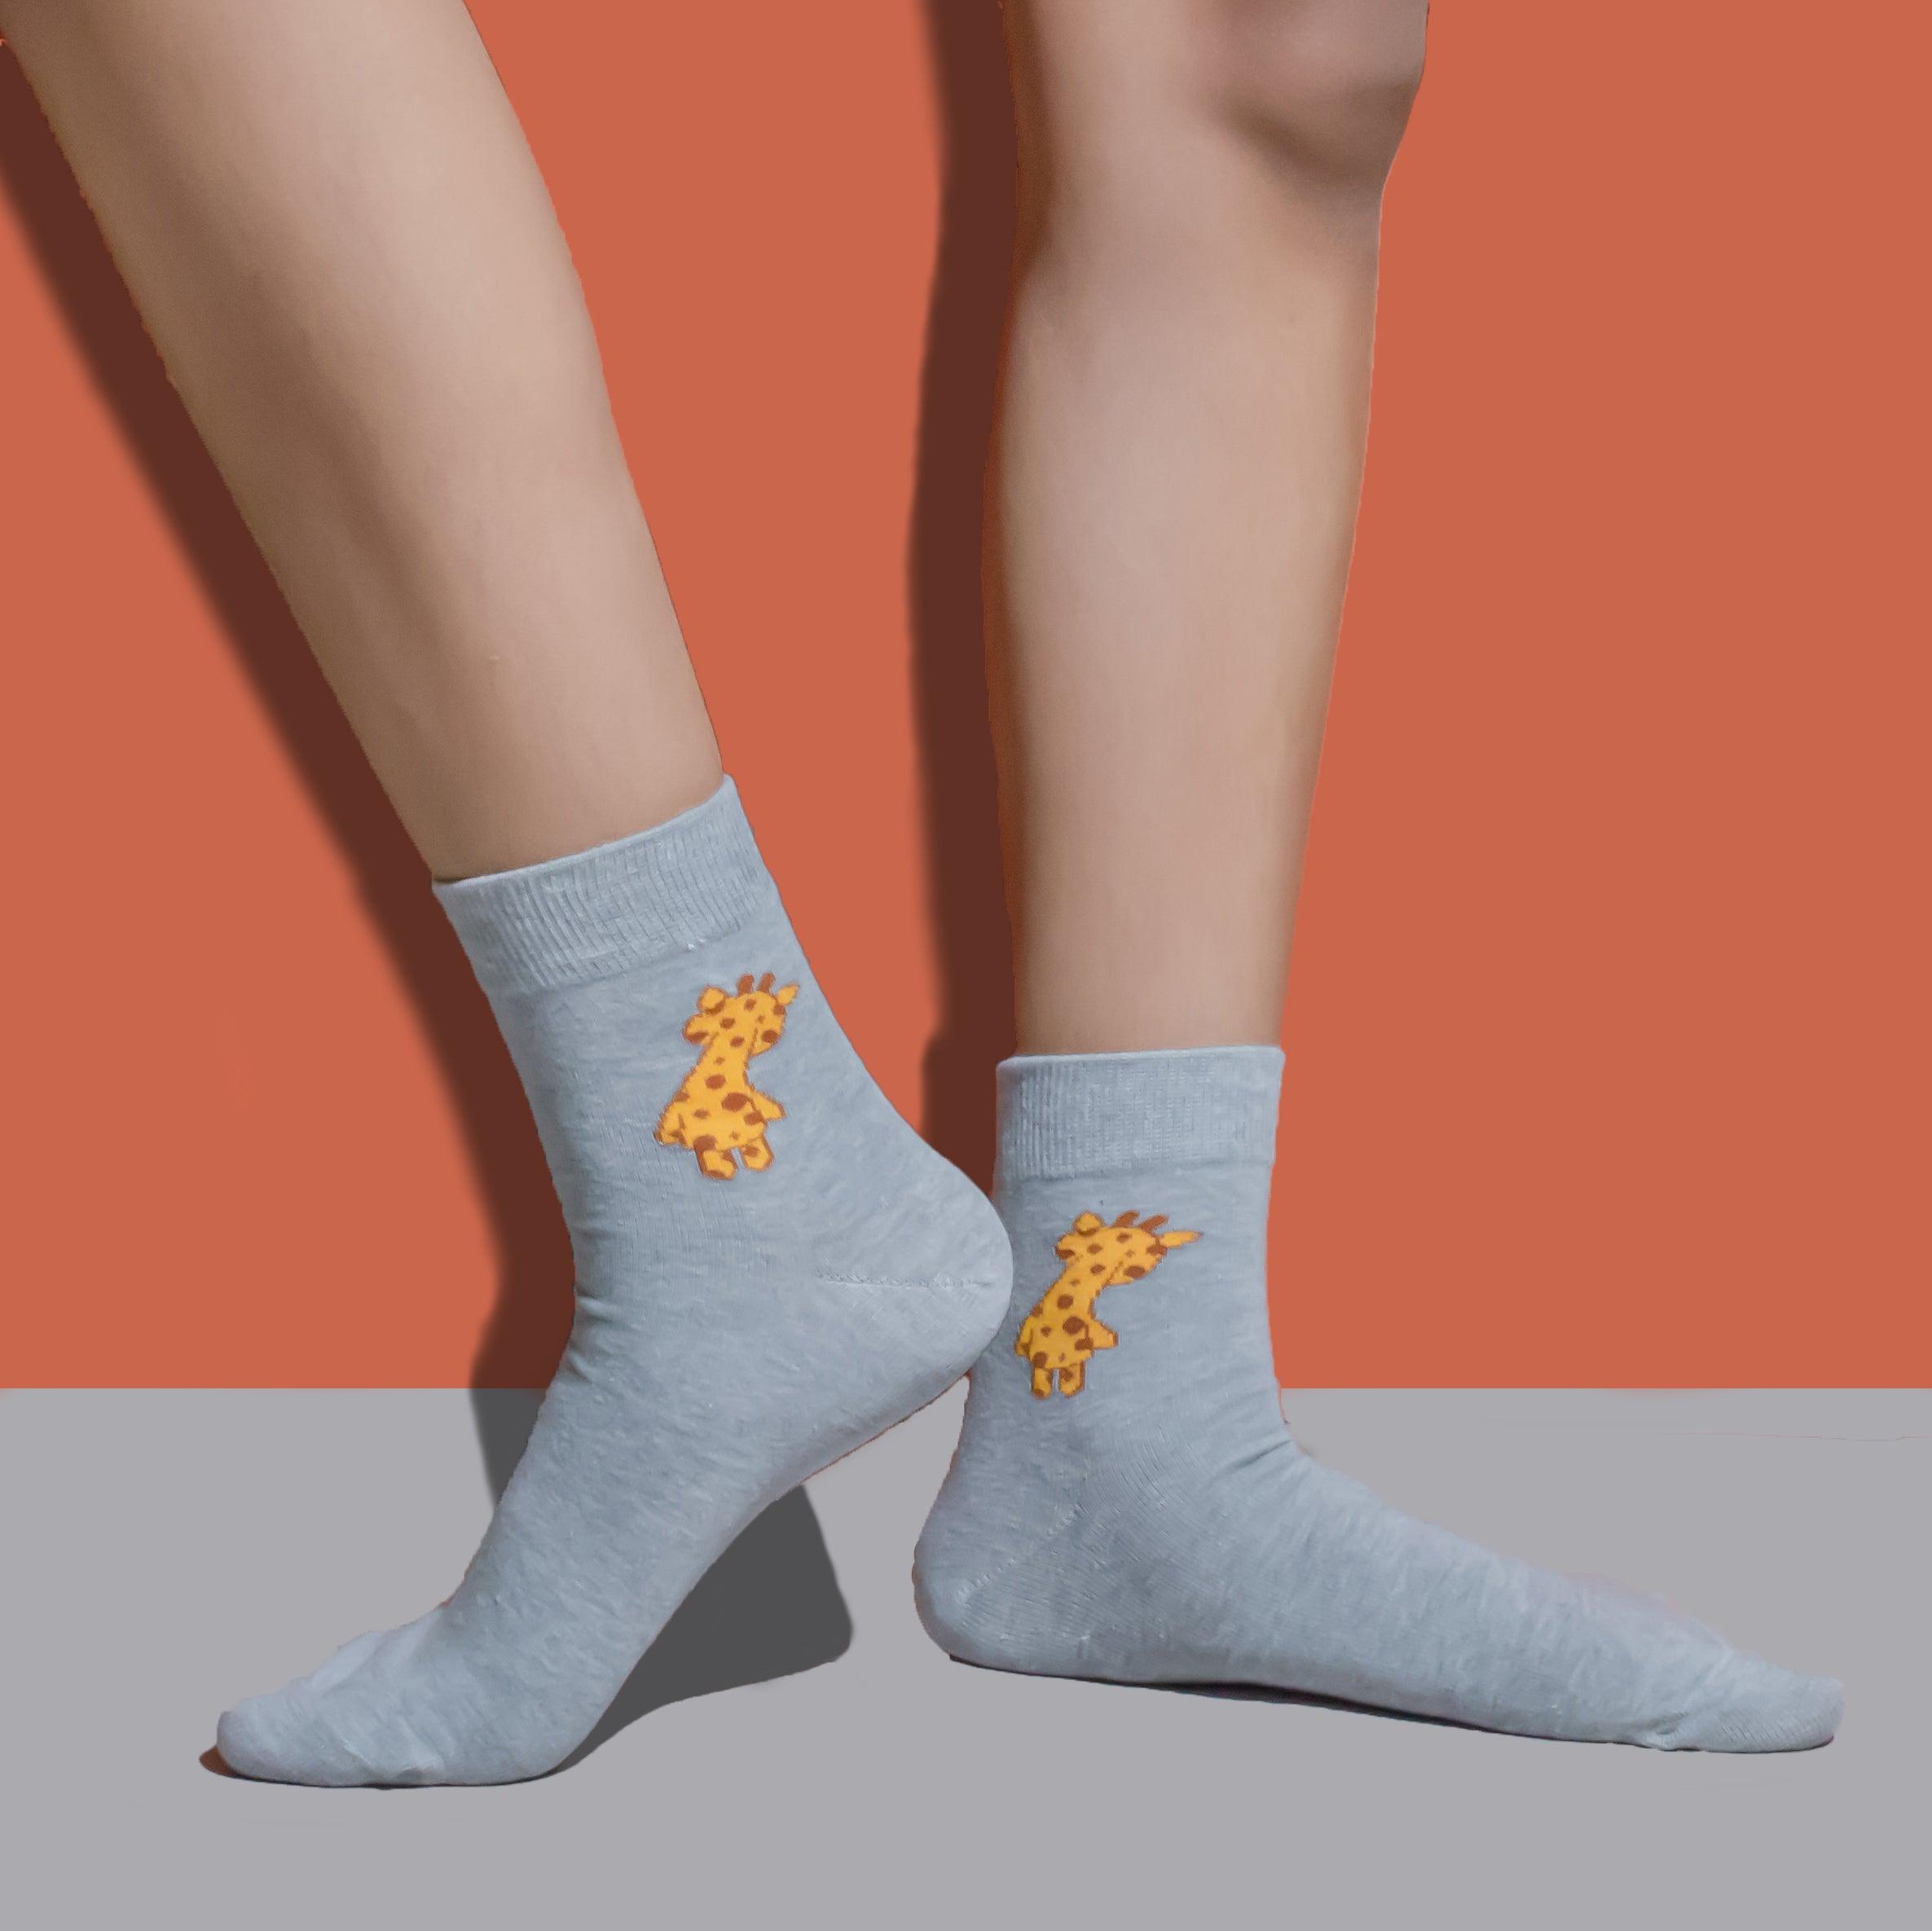 Quirky Socks - We're Learning From the Geniuses! - soxytoes